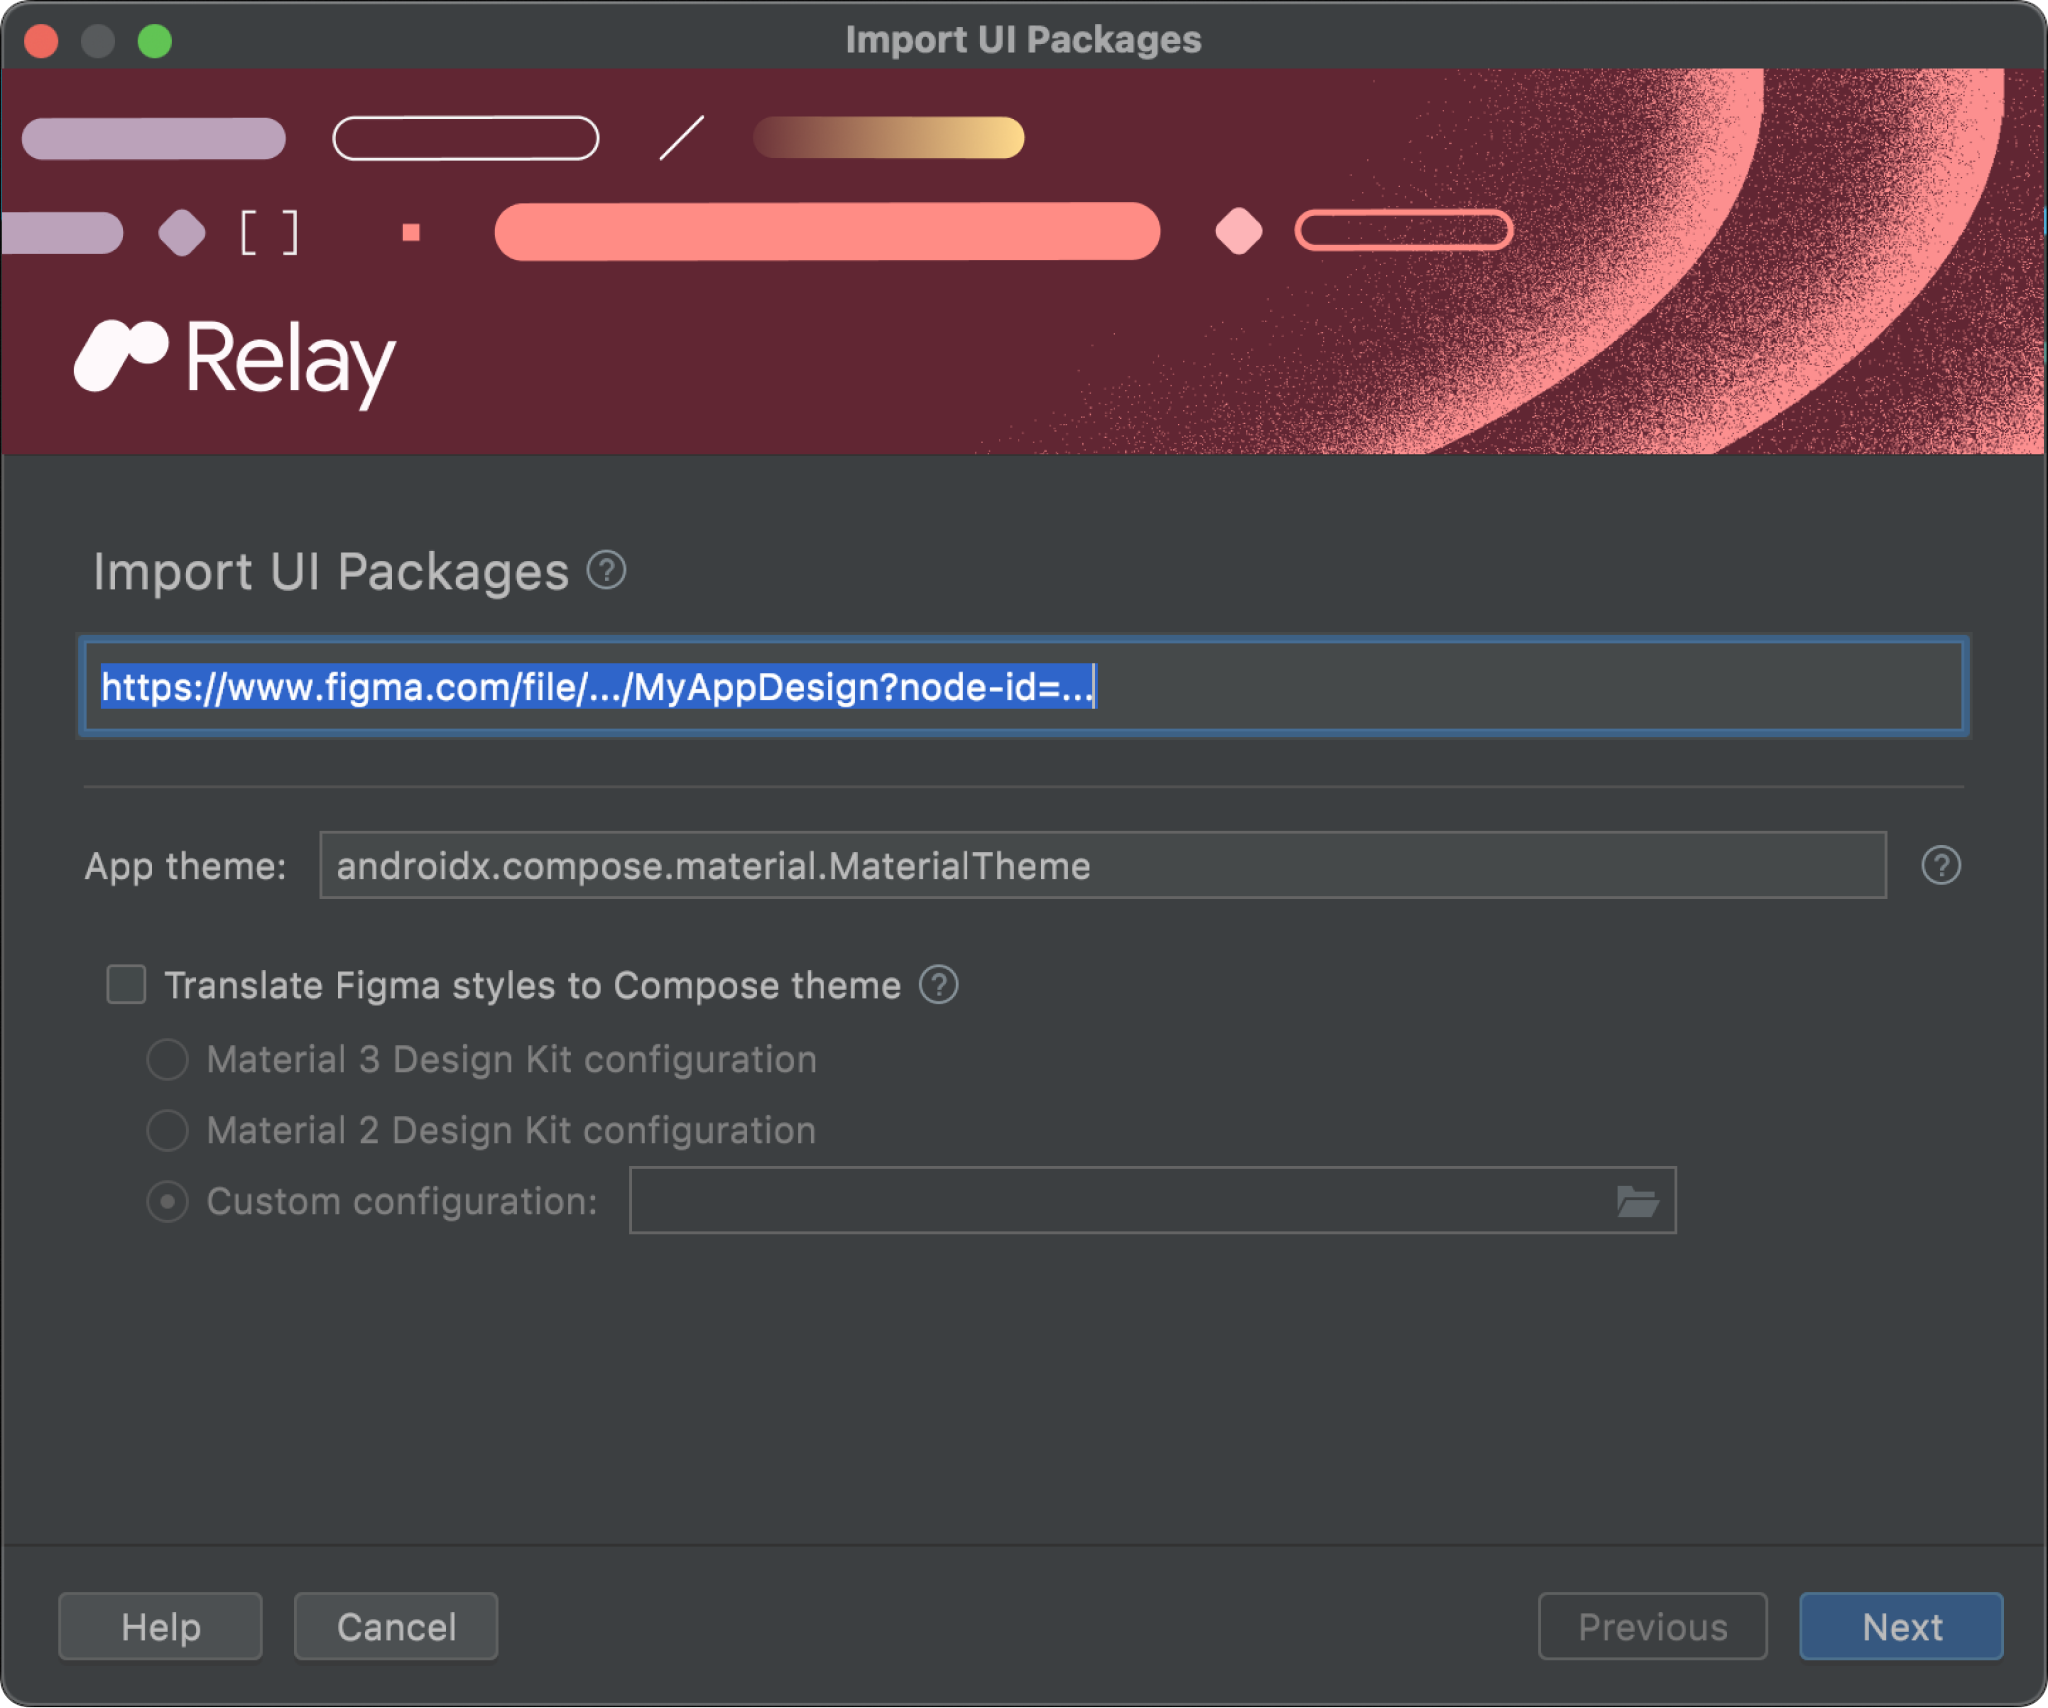 Relay for Android Studio plugin - Import UI Packages dialog